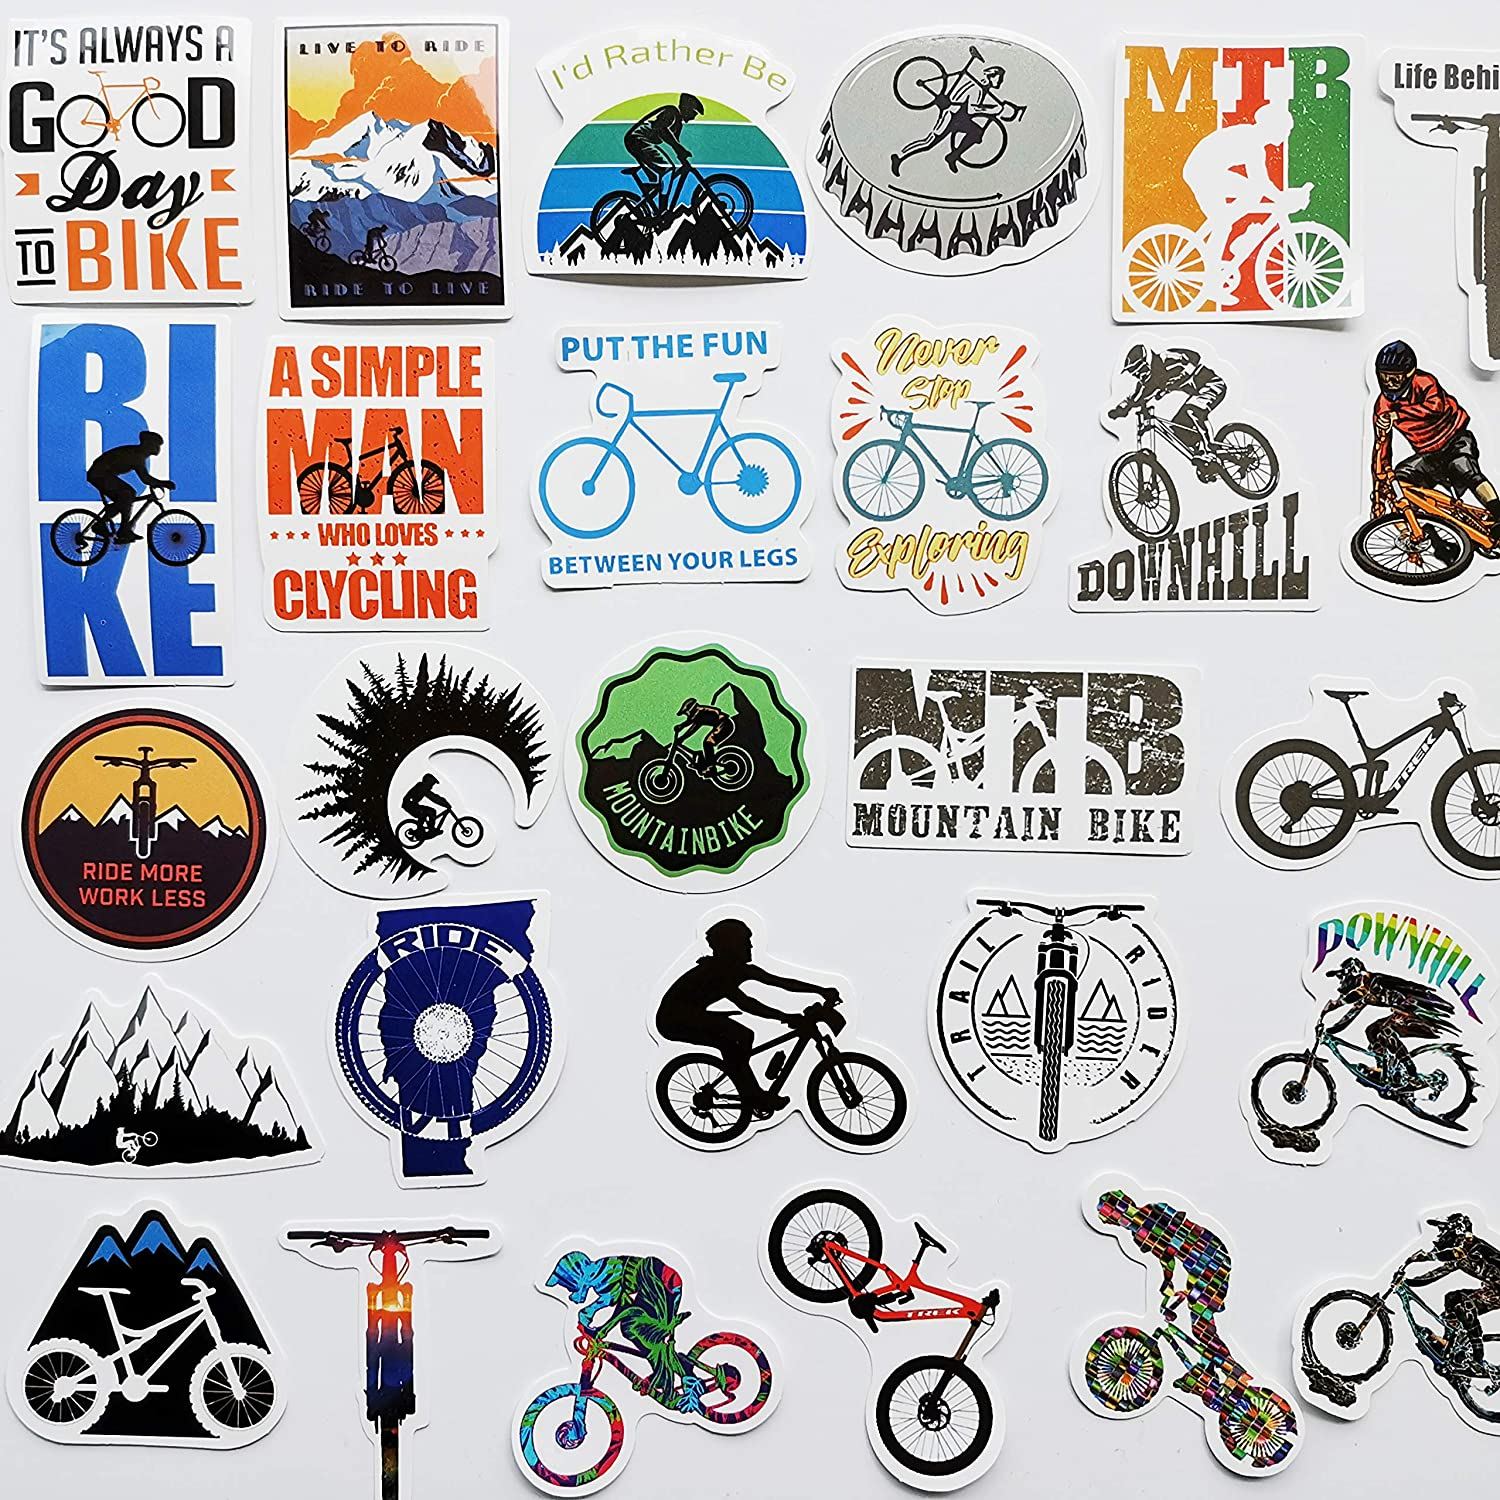 Stickers can make for an interesting mountain bike fender accessory and has multiple purposes such as increased visibility and easier identification.